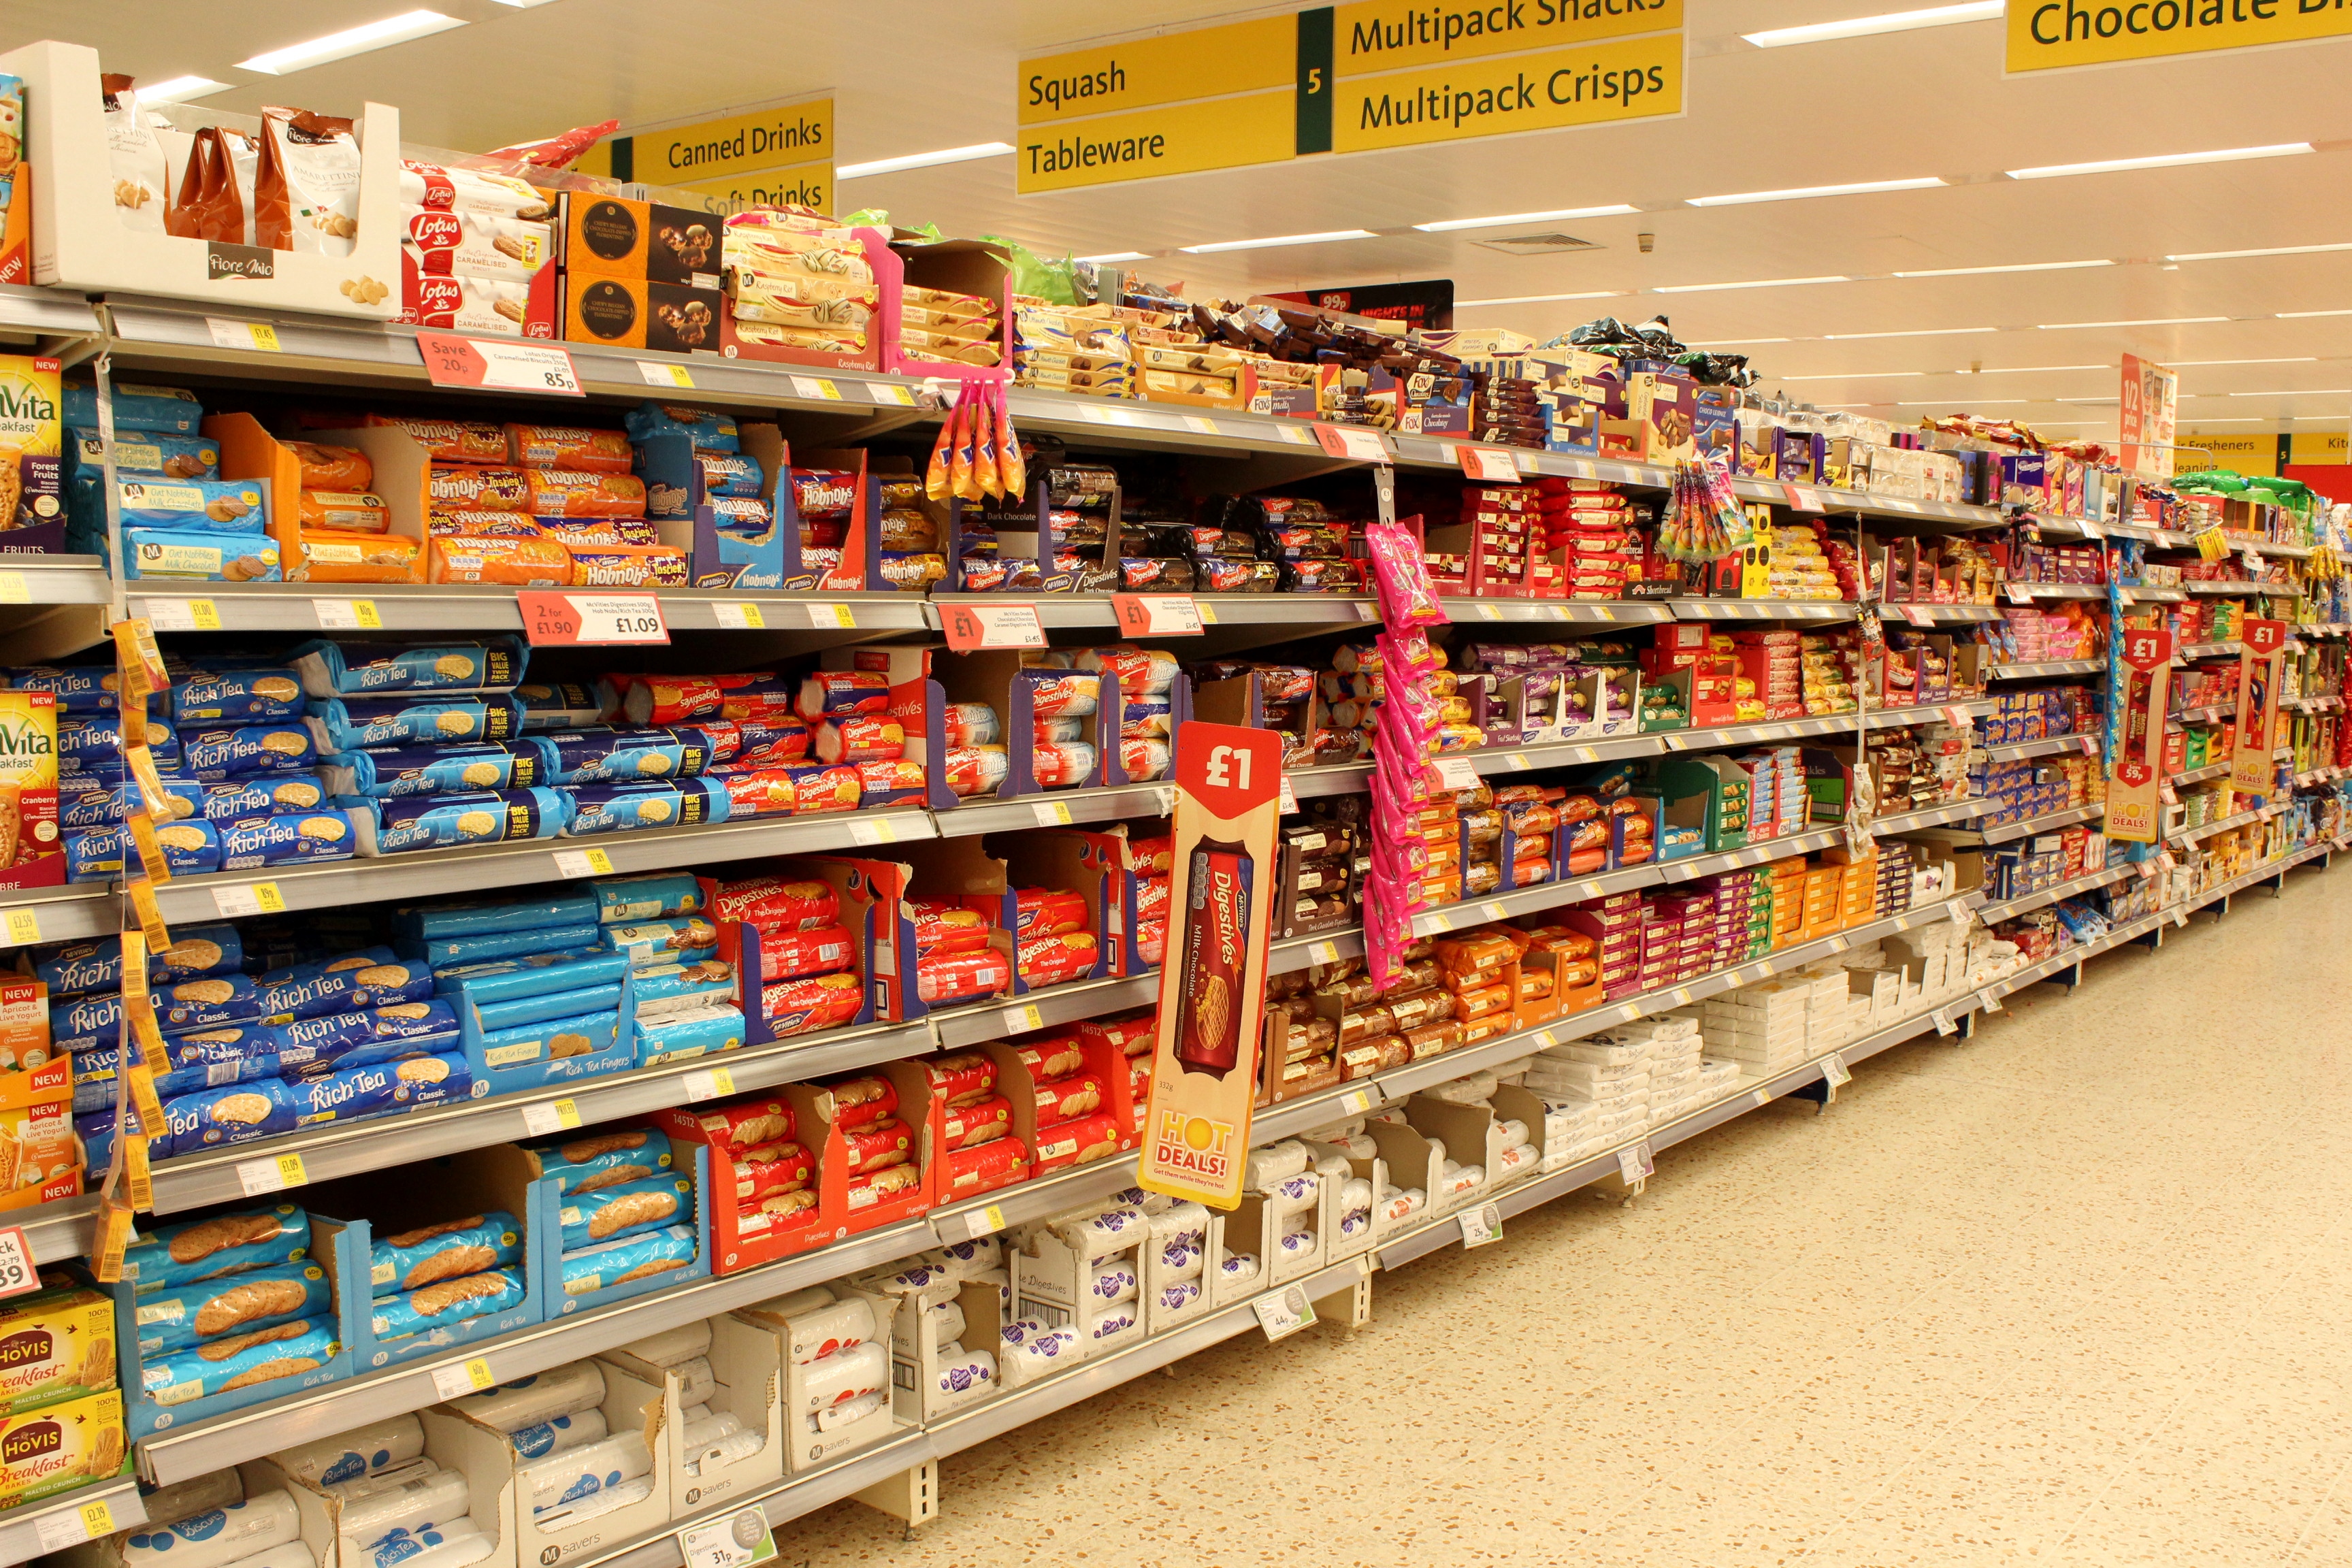 United Biscuits publishes Category Vision